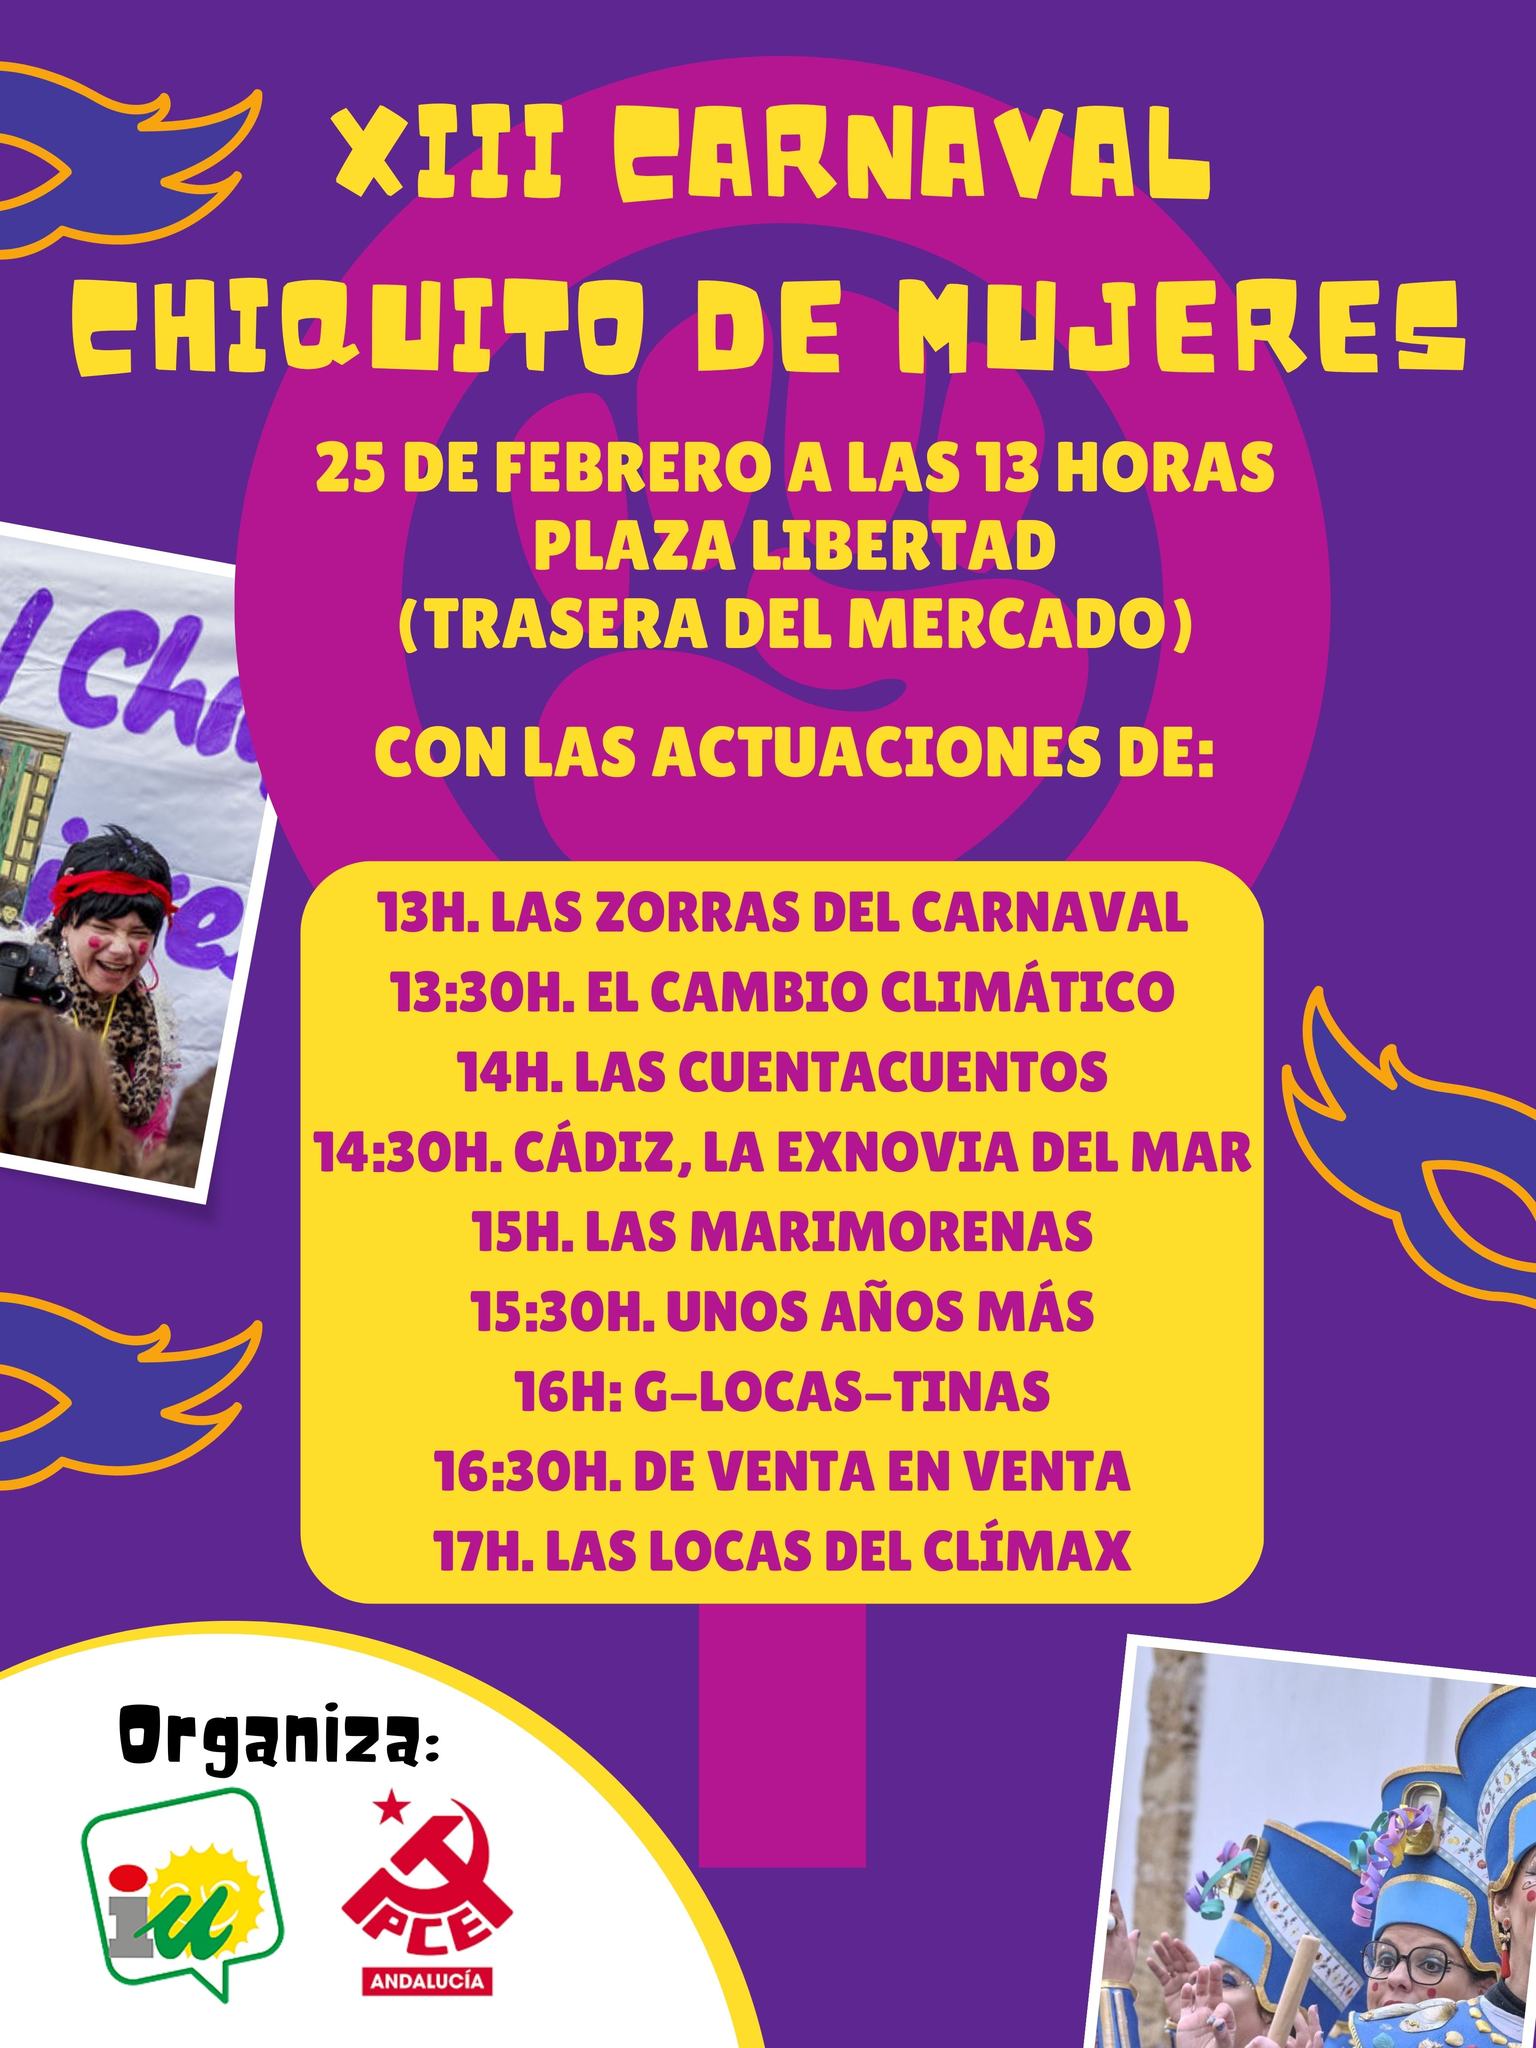 Xiii carnaval chiquito de mujeres